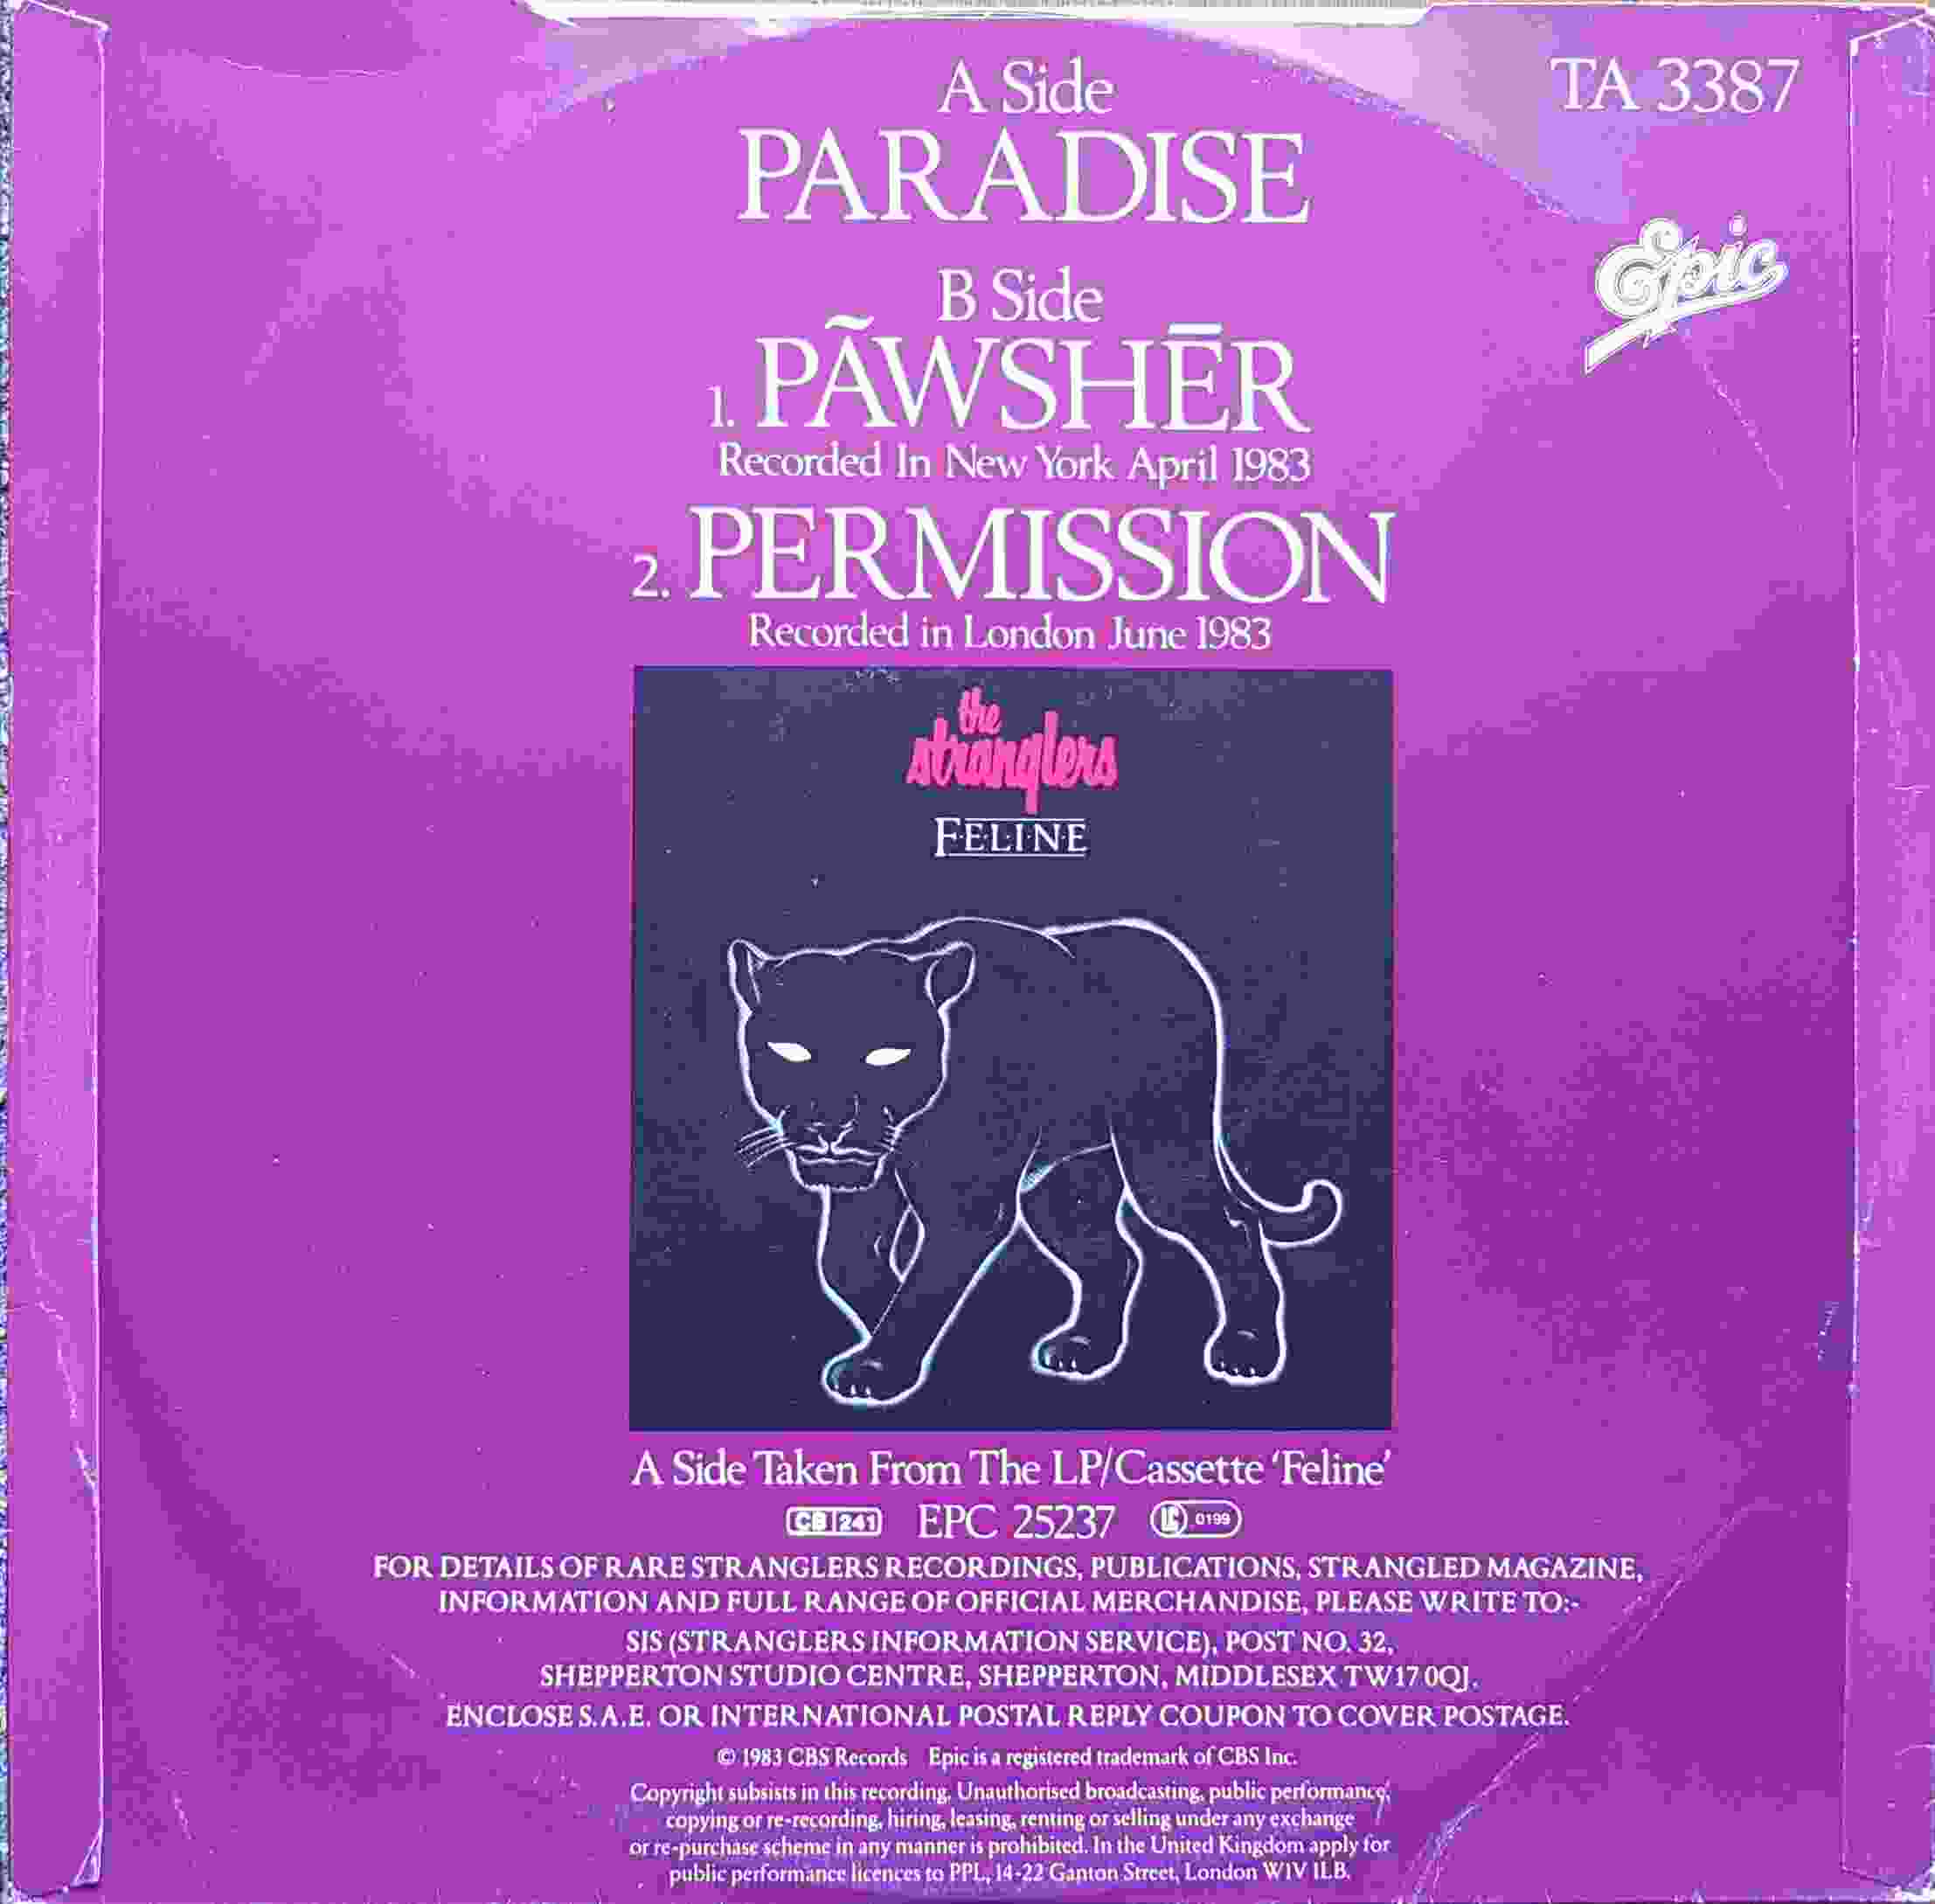 Picture of TA 3387 Paradise by artist The Stranglers from The Stranglers